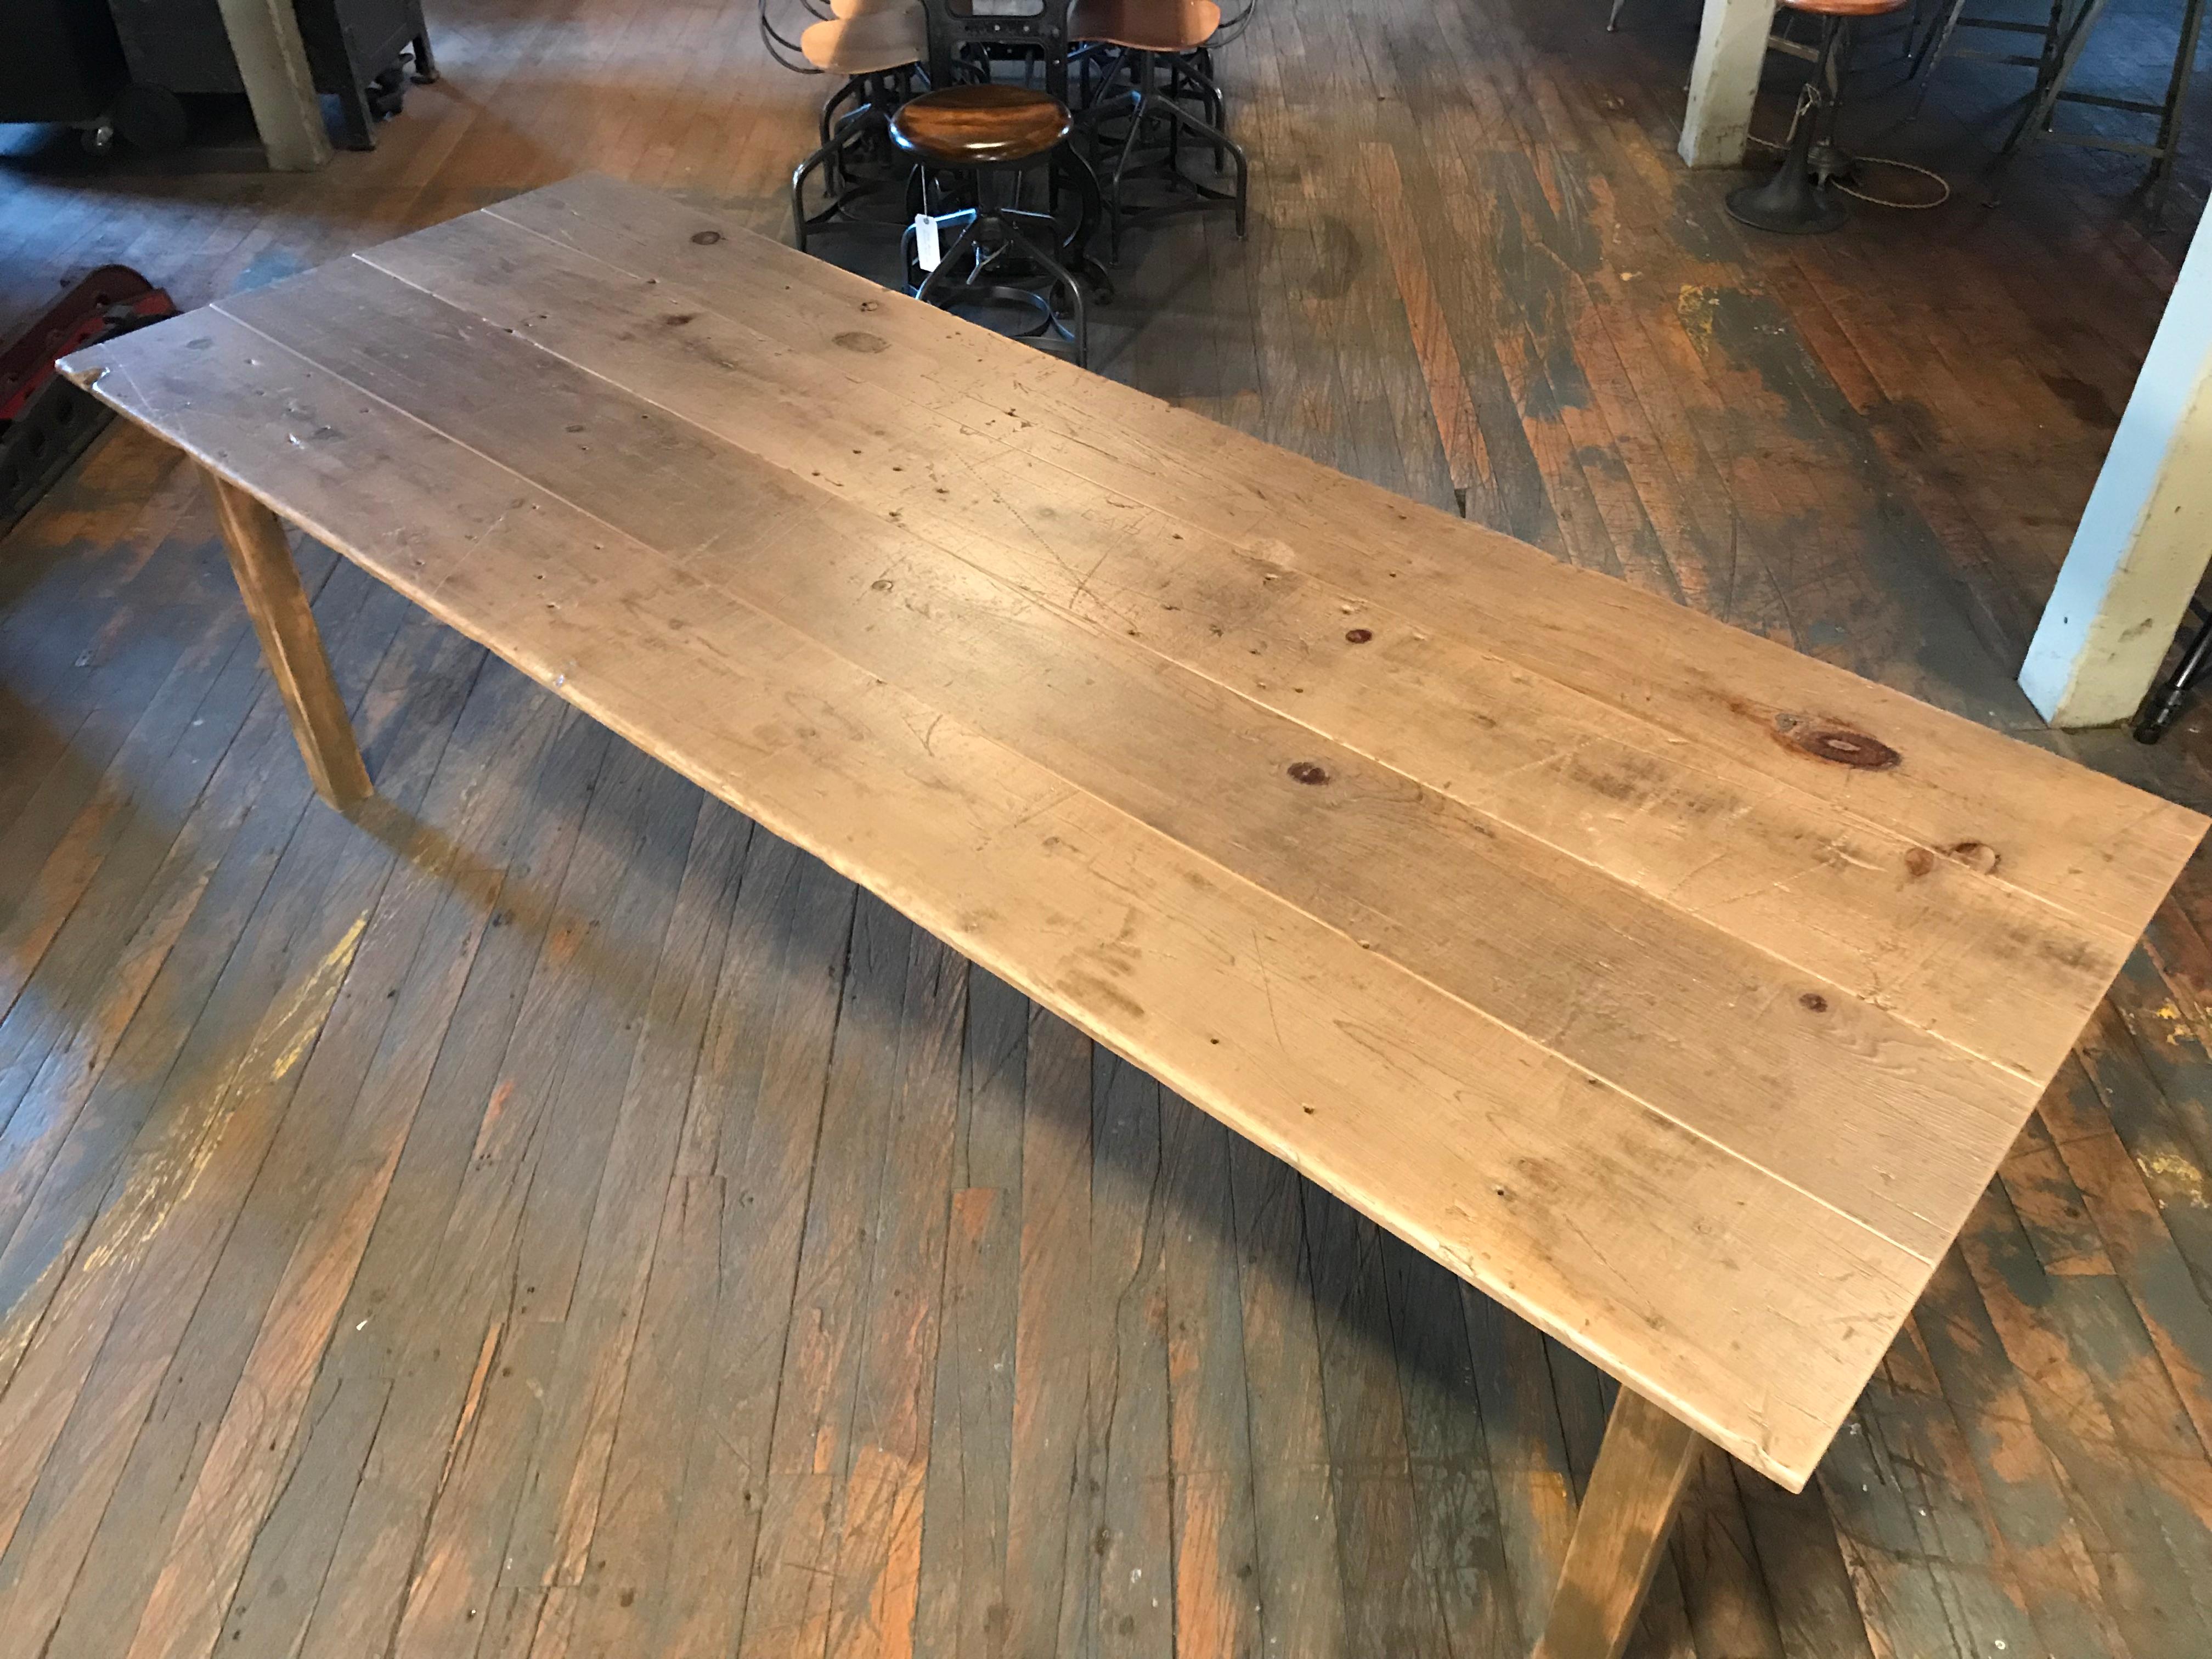 Reclaimed tobacco wood farm / dining / country harvest table. The pine tops were originally used as tobacco sorting tables in New England. Beautifully aged wood with rich history and beautiful character. Table measures 96